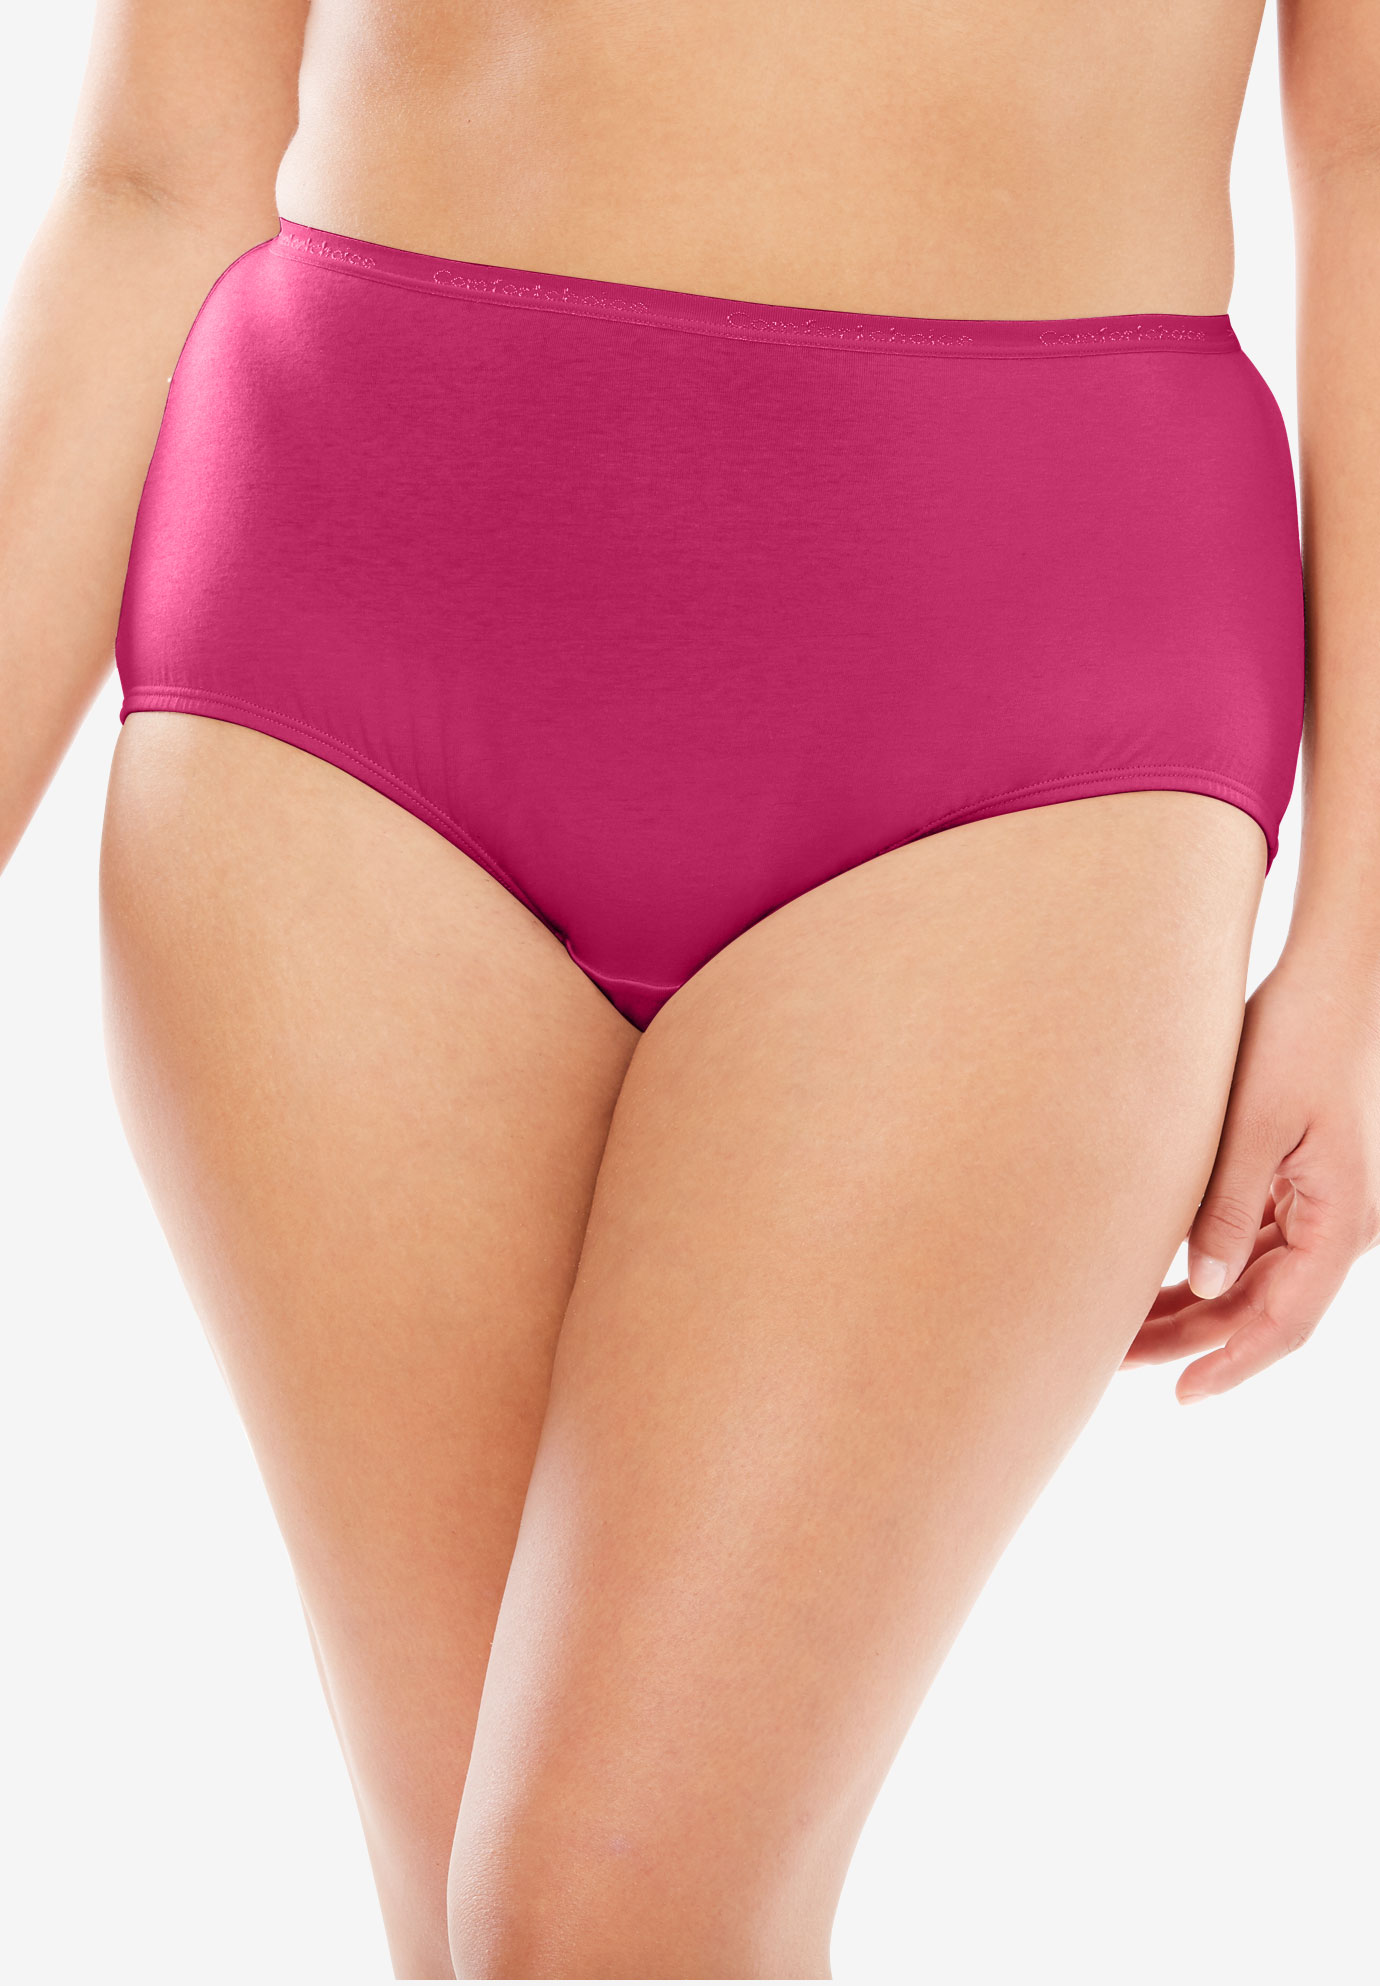 Cotton Full Cut Brief By Comfort Choice® Plus Size Panties Jessica London 0597